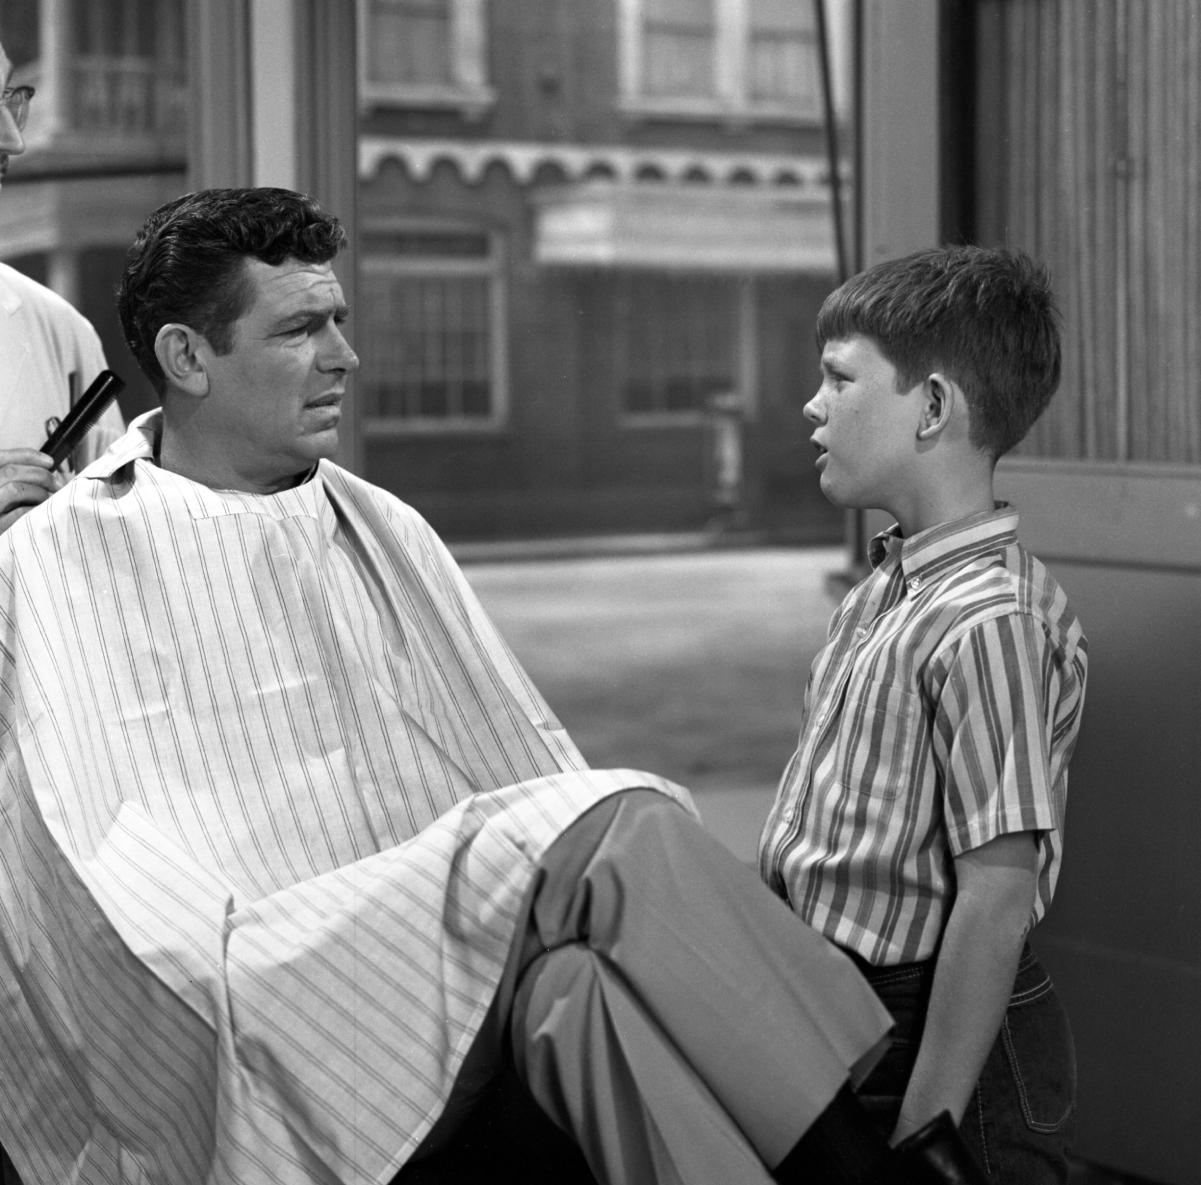 Actors Andy Griffith and Ron Howard in a scene from 'The Andy Griffith Show'